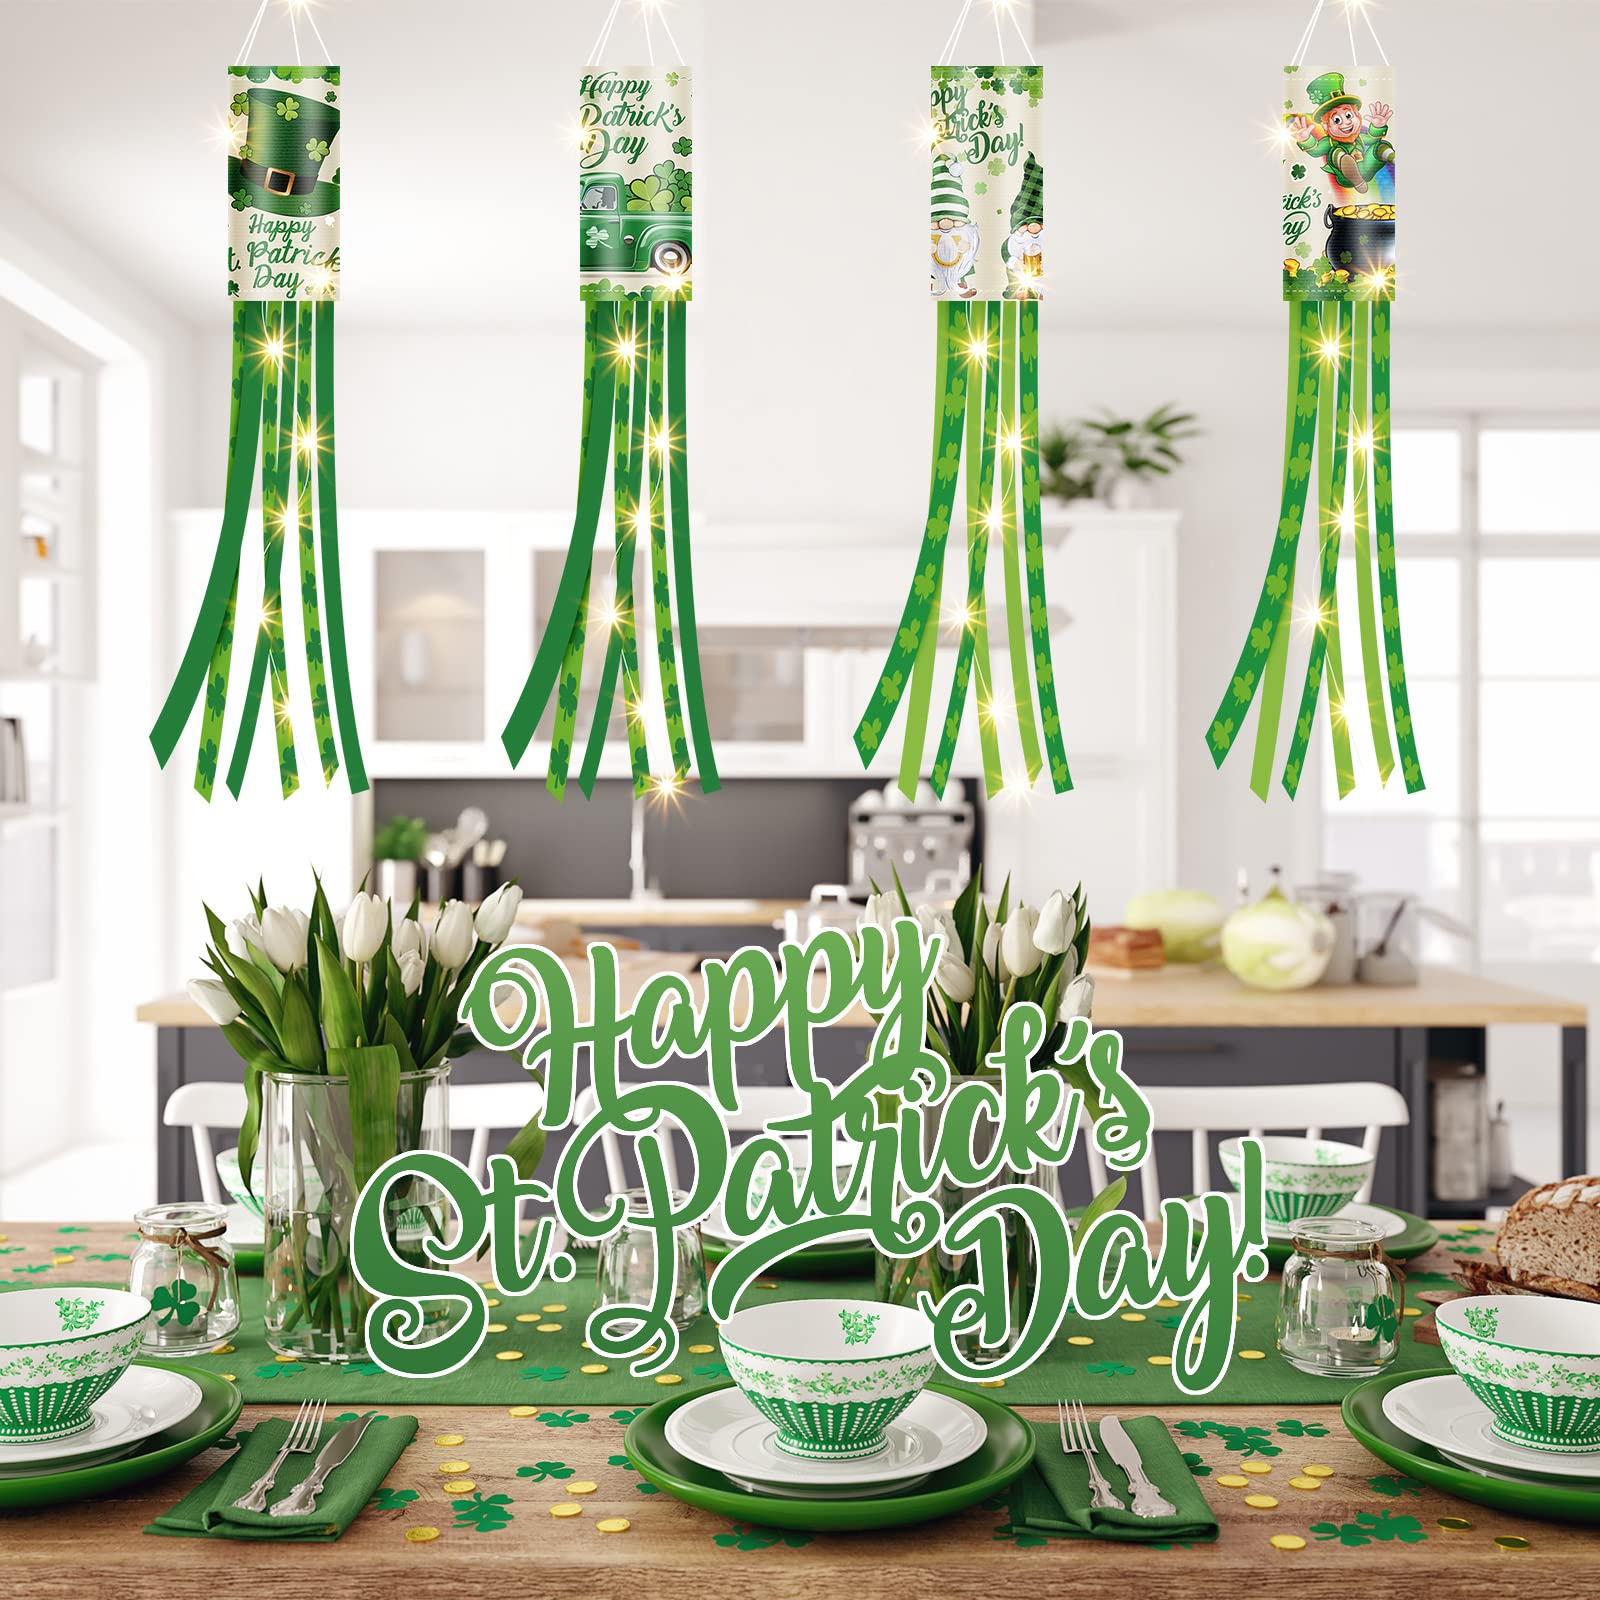 4 Pieces St. Patrick's Day Windsock with LED Light String 40 Inch Green Shamrock Truck Gnome Hat Pattern Windsock Happy St. Patrick's Day Outdoor Hanging Windsocks and Flags Wind Sock for Yard Decor